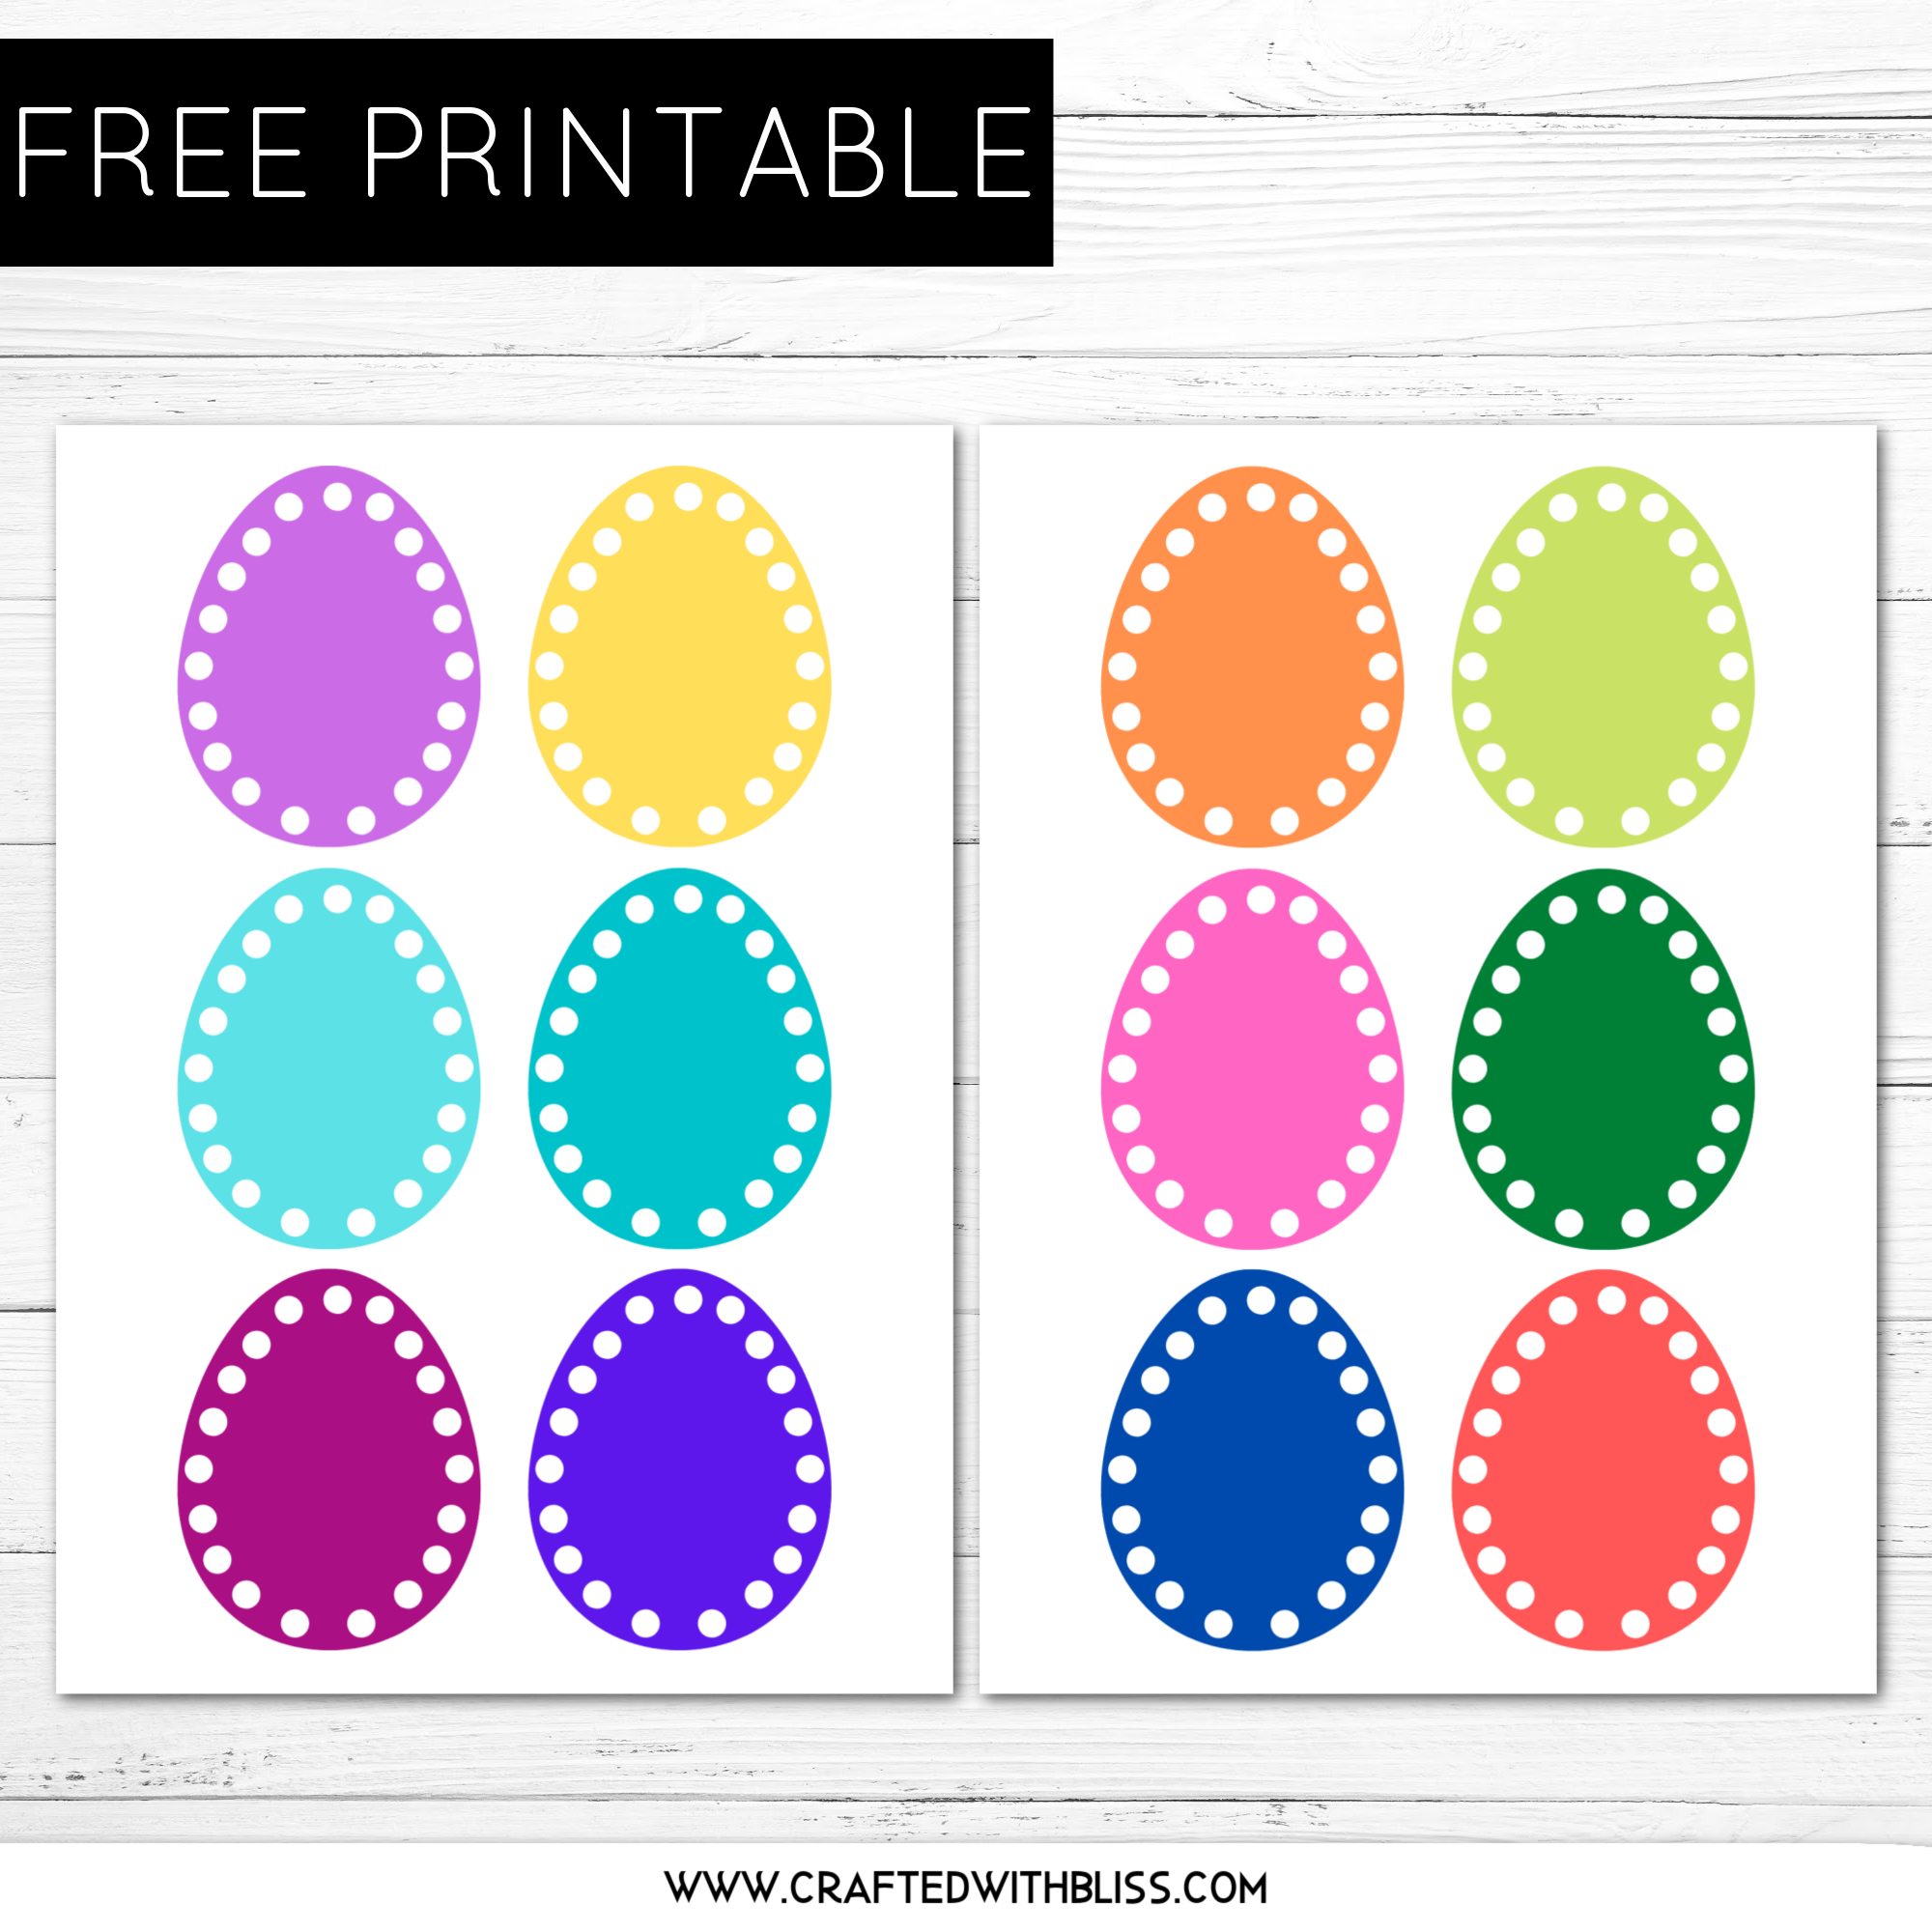 Free Printable Hole Punch Activities Free Printable Templates